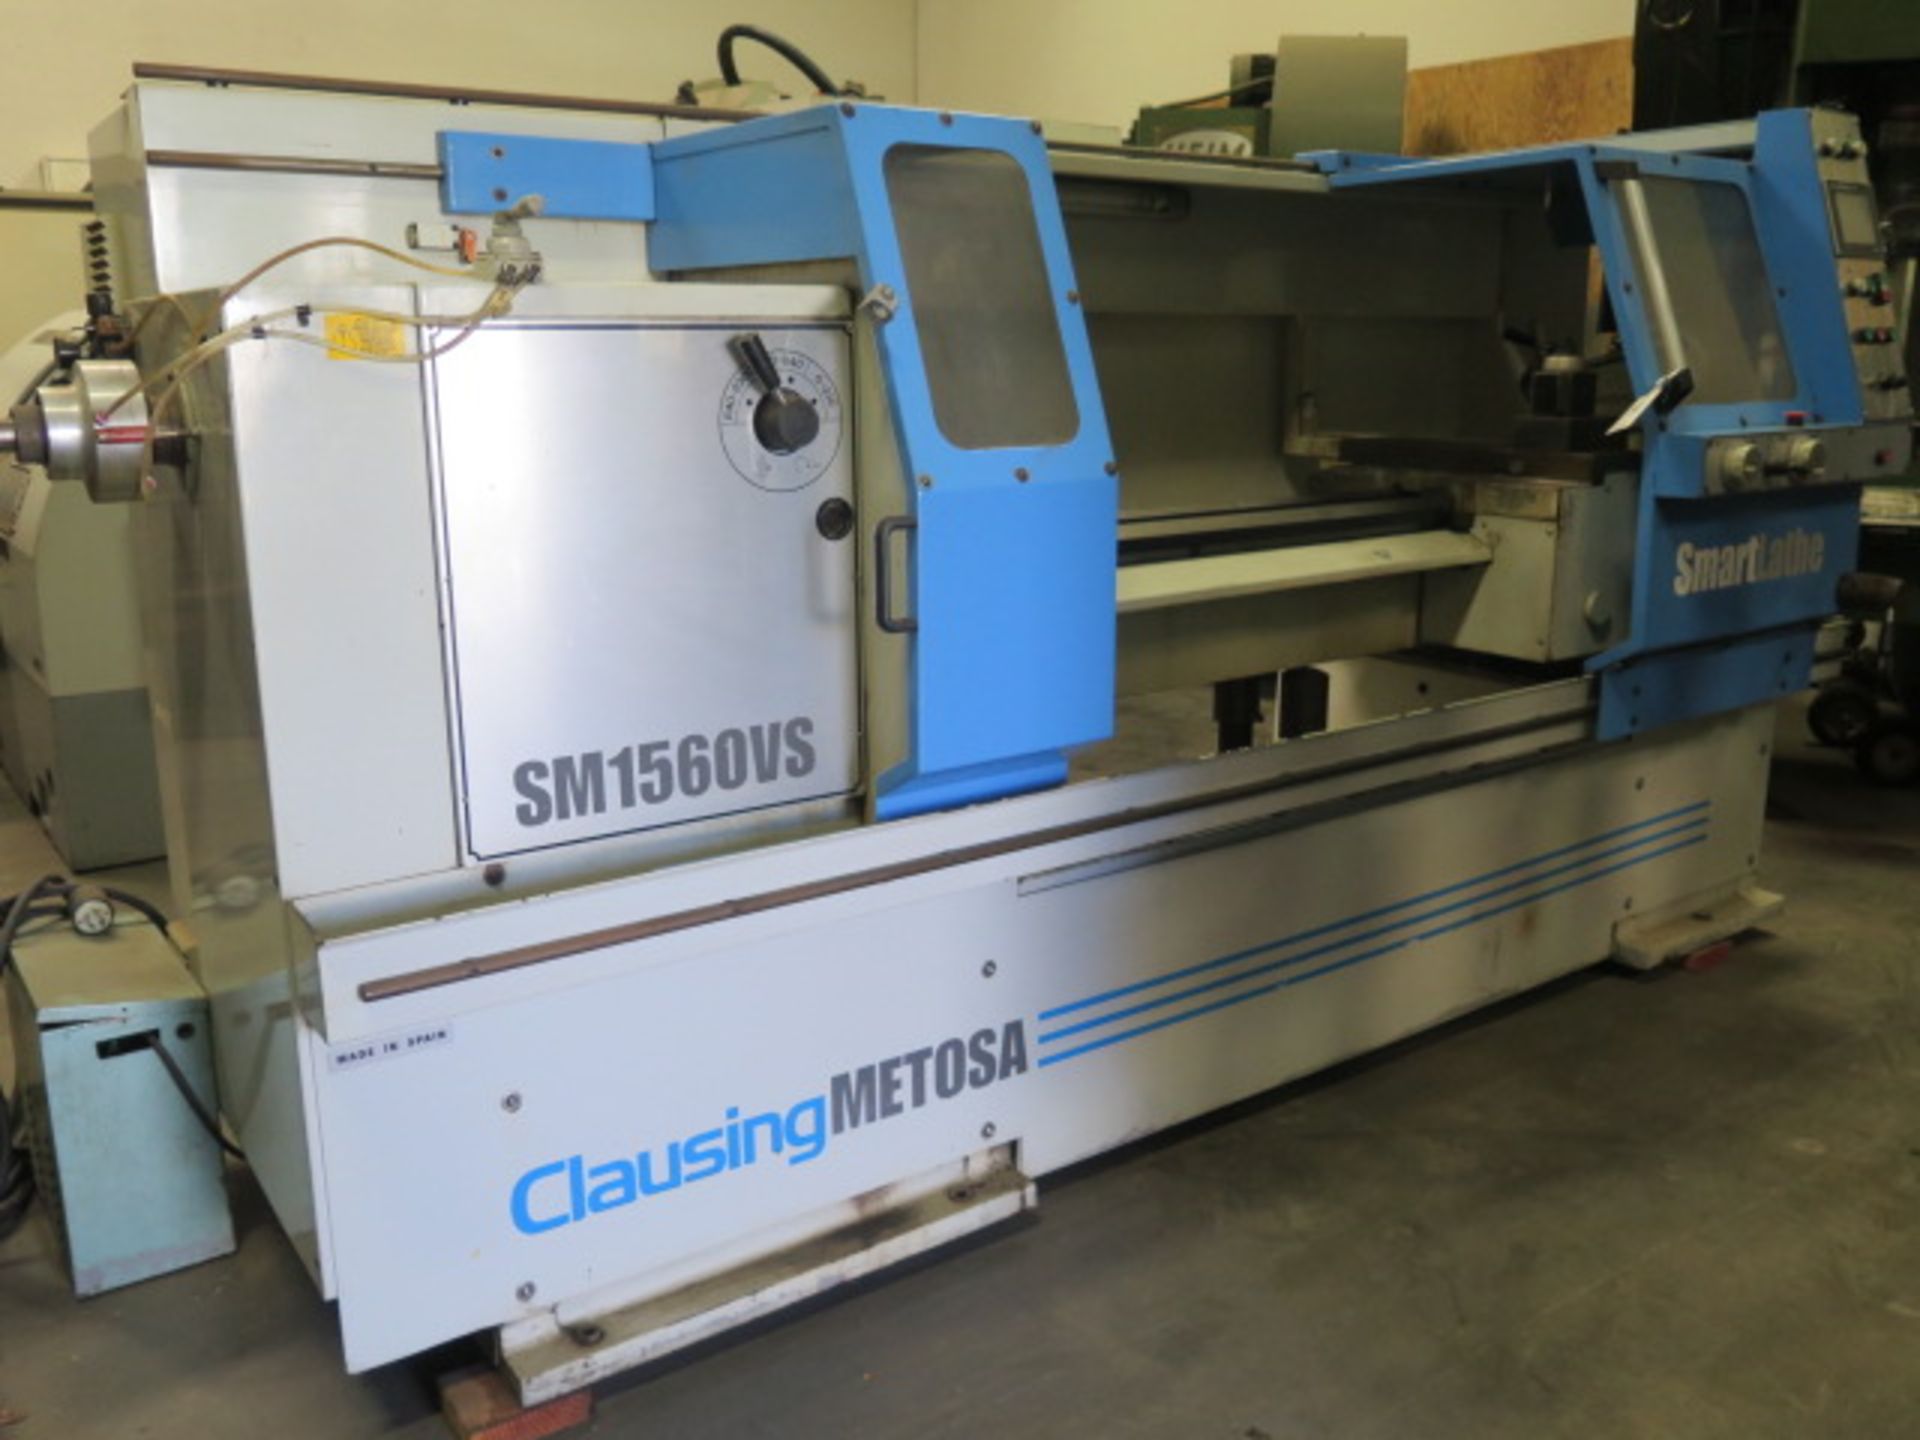 2001 Clausing Metosa SM1560VS 15” x 60” “Smart Lathe” Soft CNC Gap Bed lathe, SOLD AS IS - Image 3 of 14